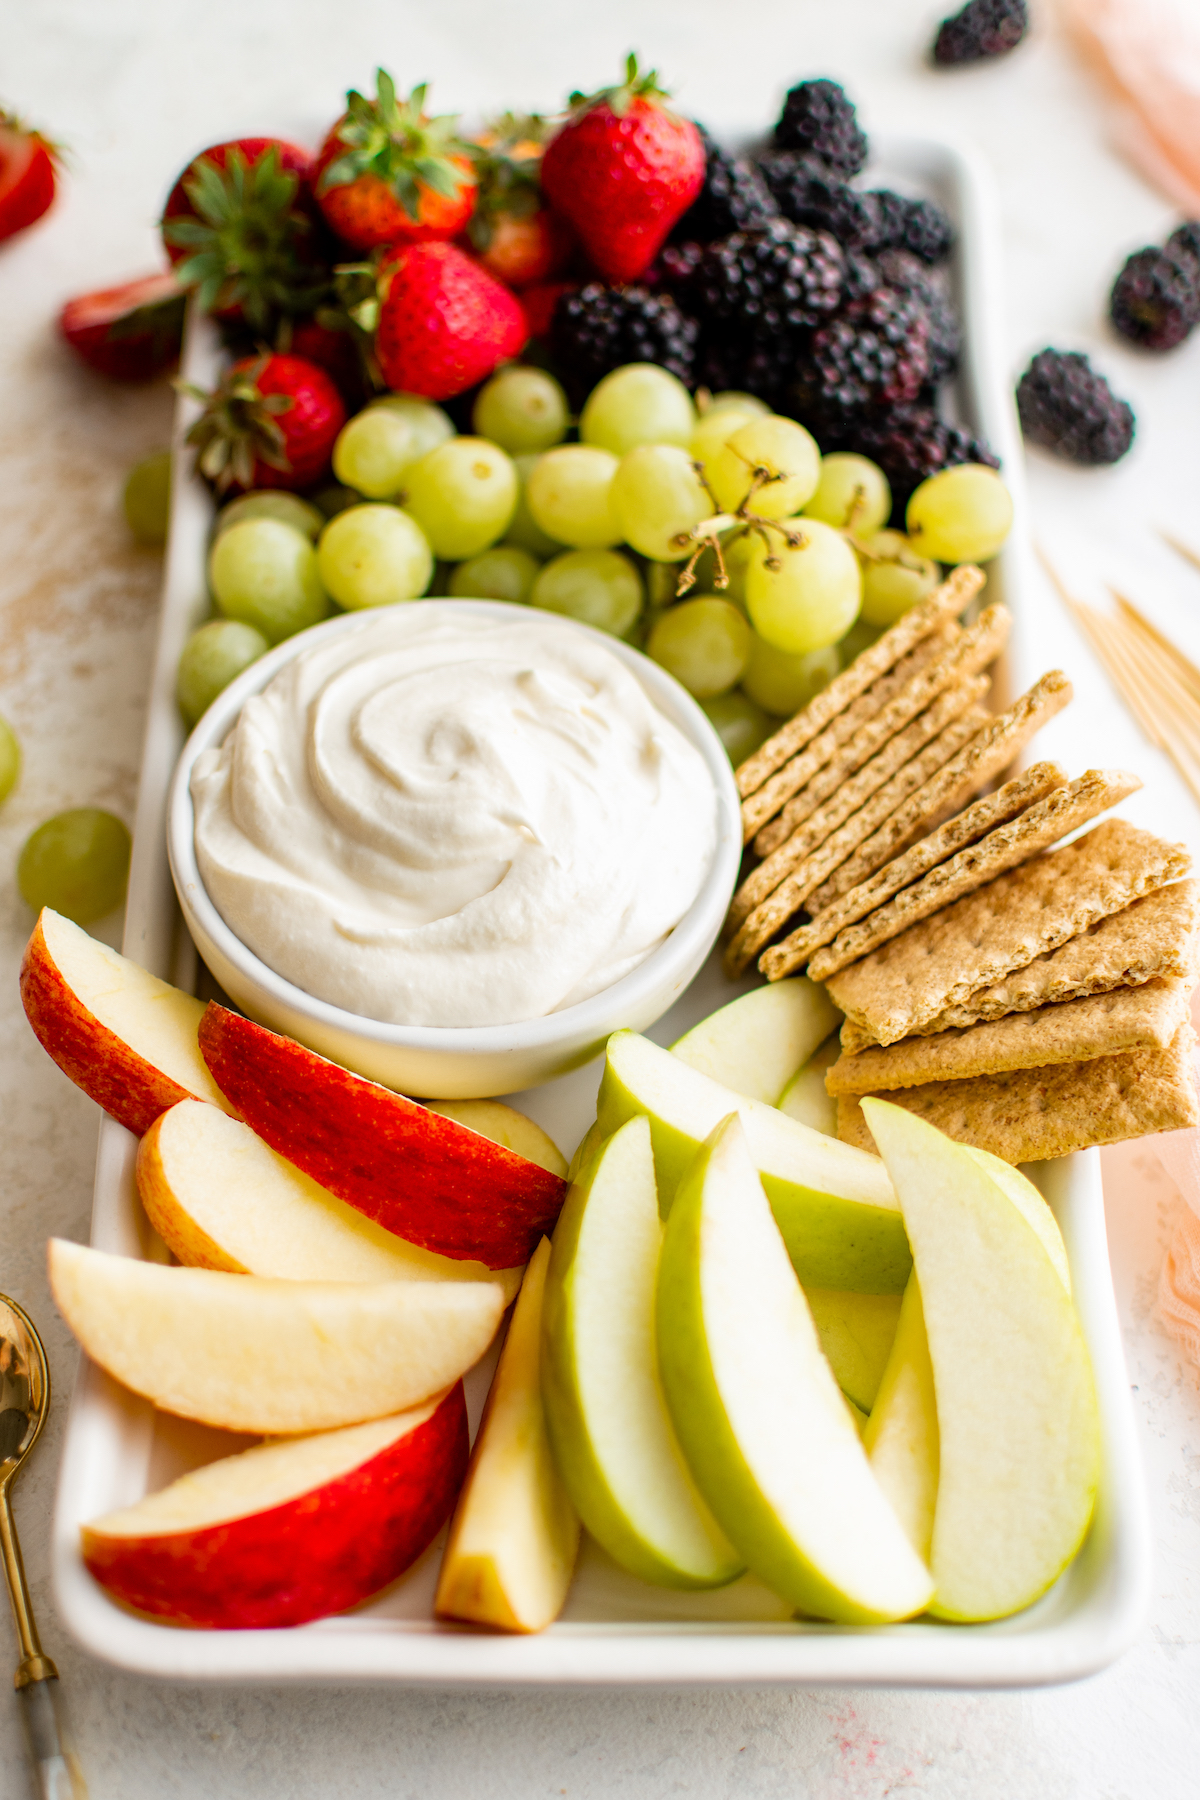 Grapes, apples, crackers, berries, and creamy sauce on a tray.